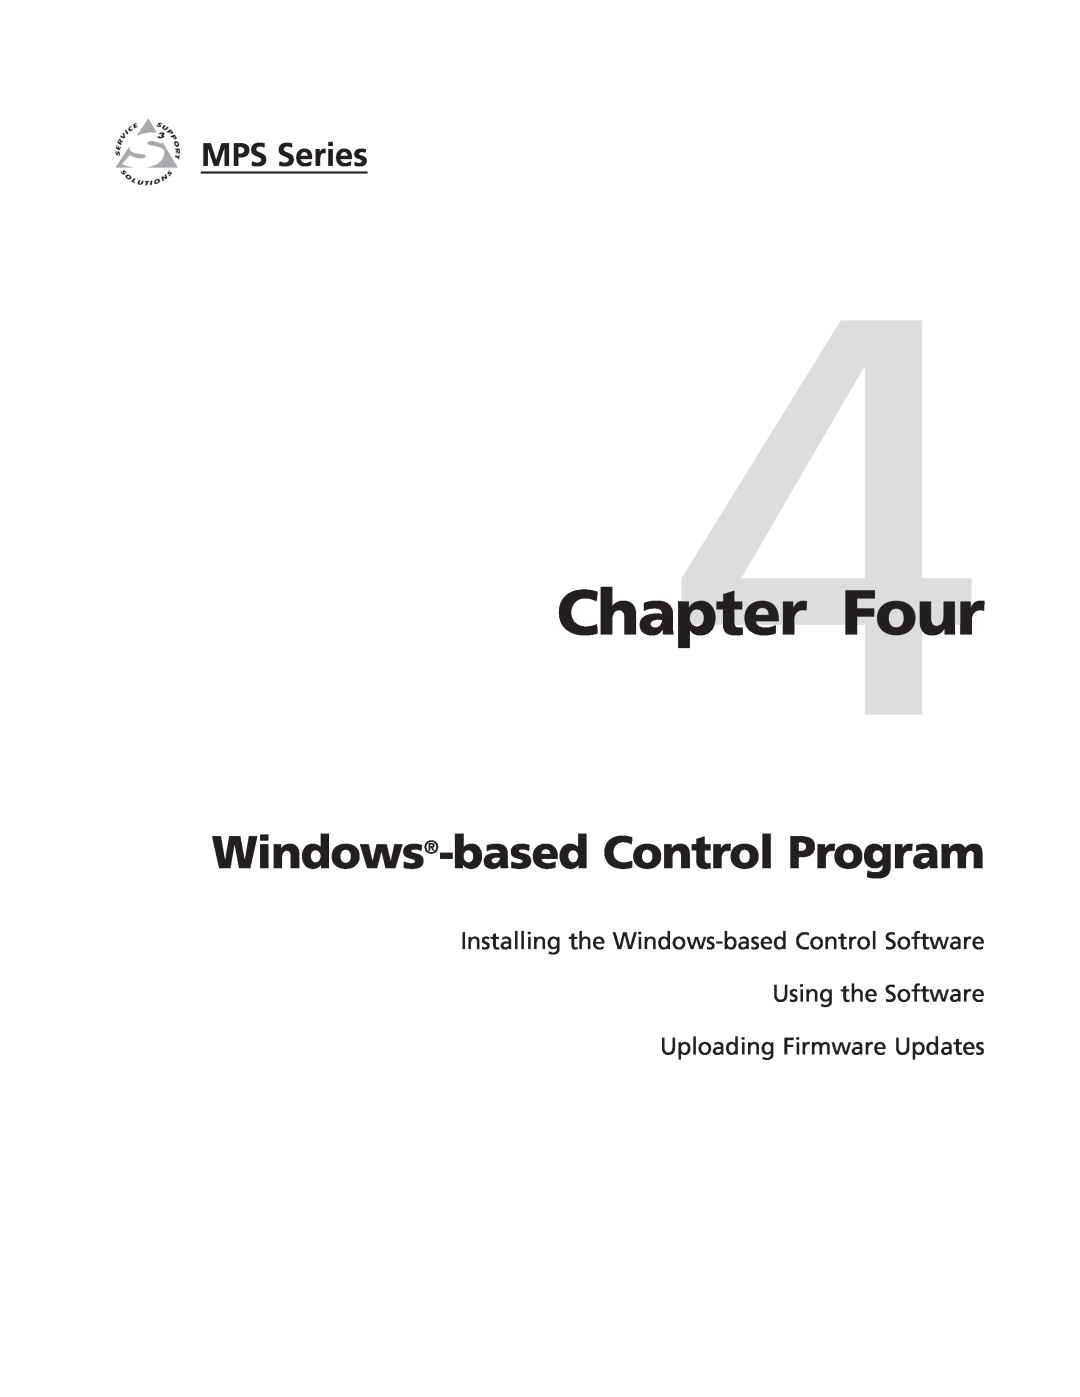 Extron electronic MPS 112CS manual Four, Windows-based Control Program, Uploading Firmware Updates, MPS Series 